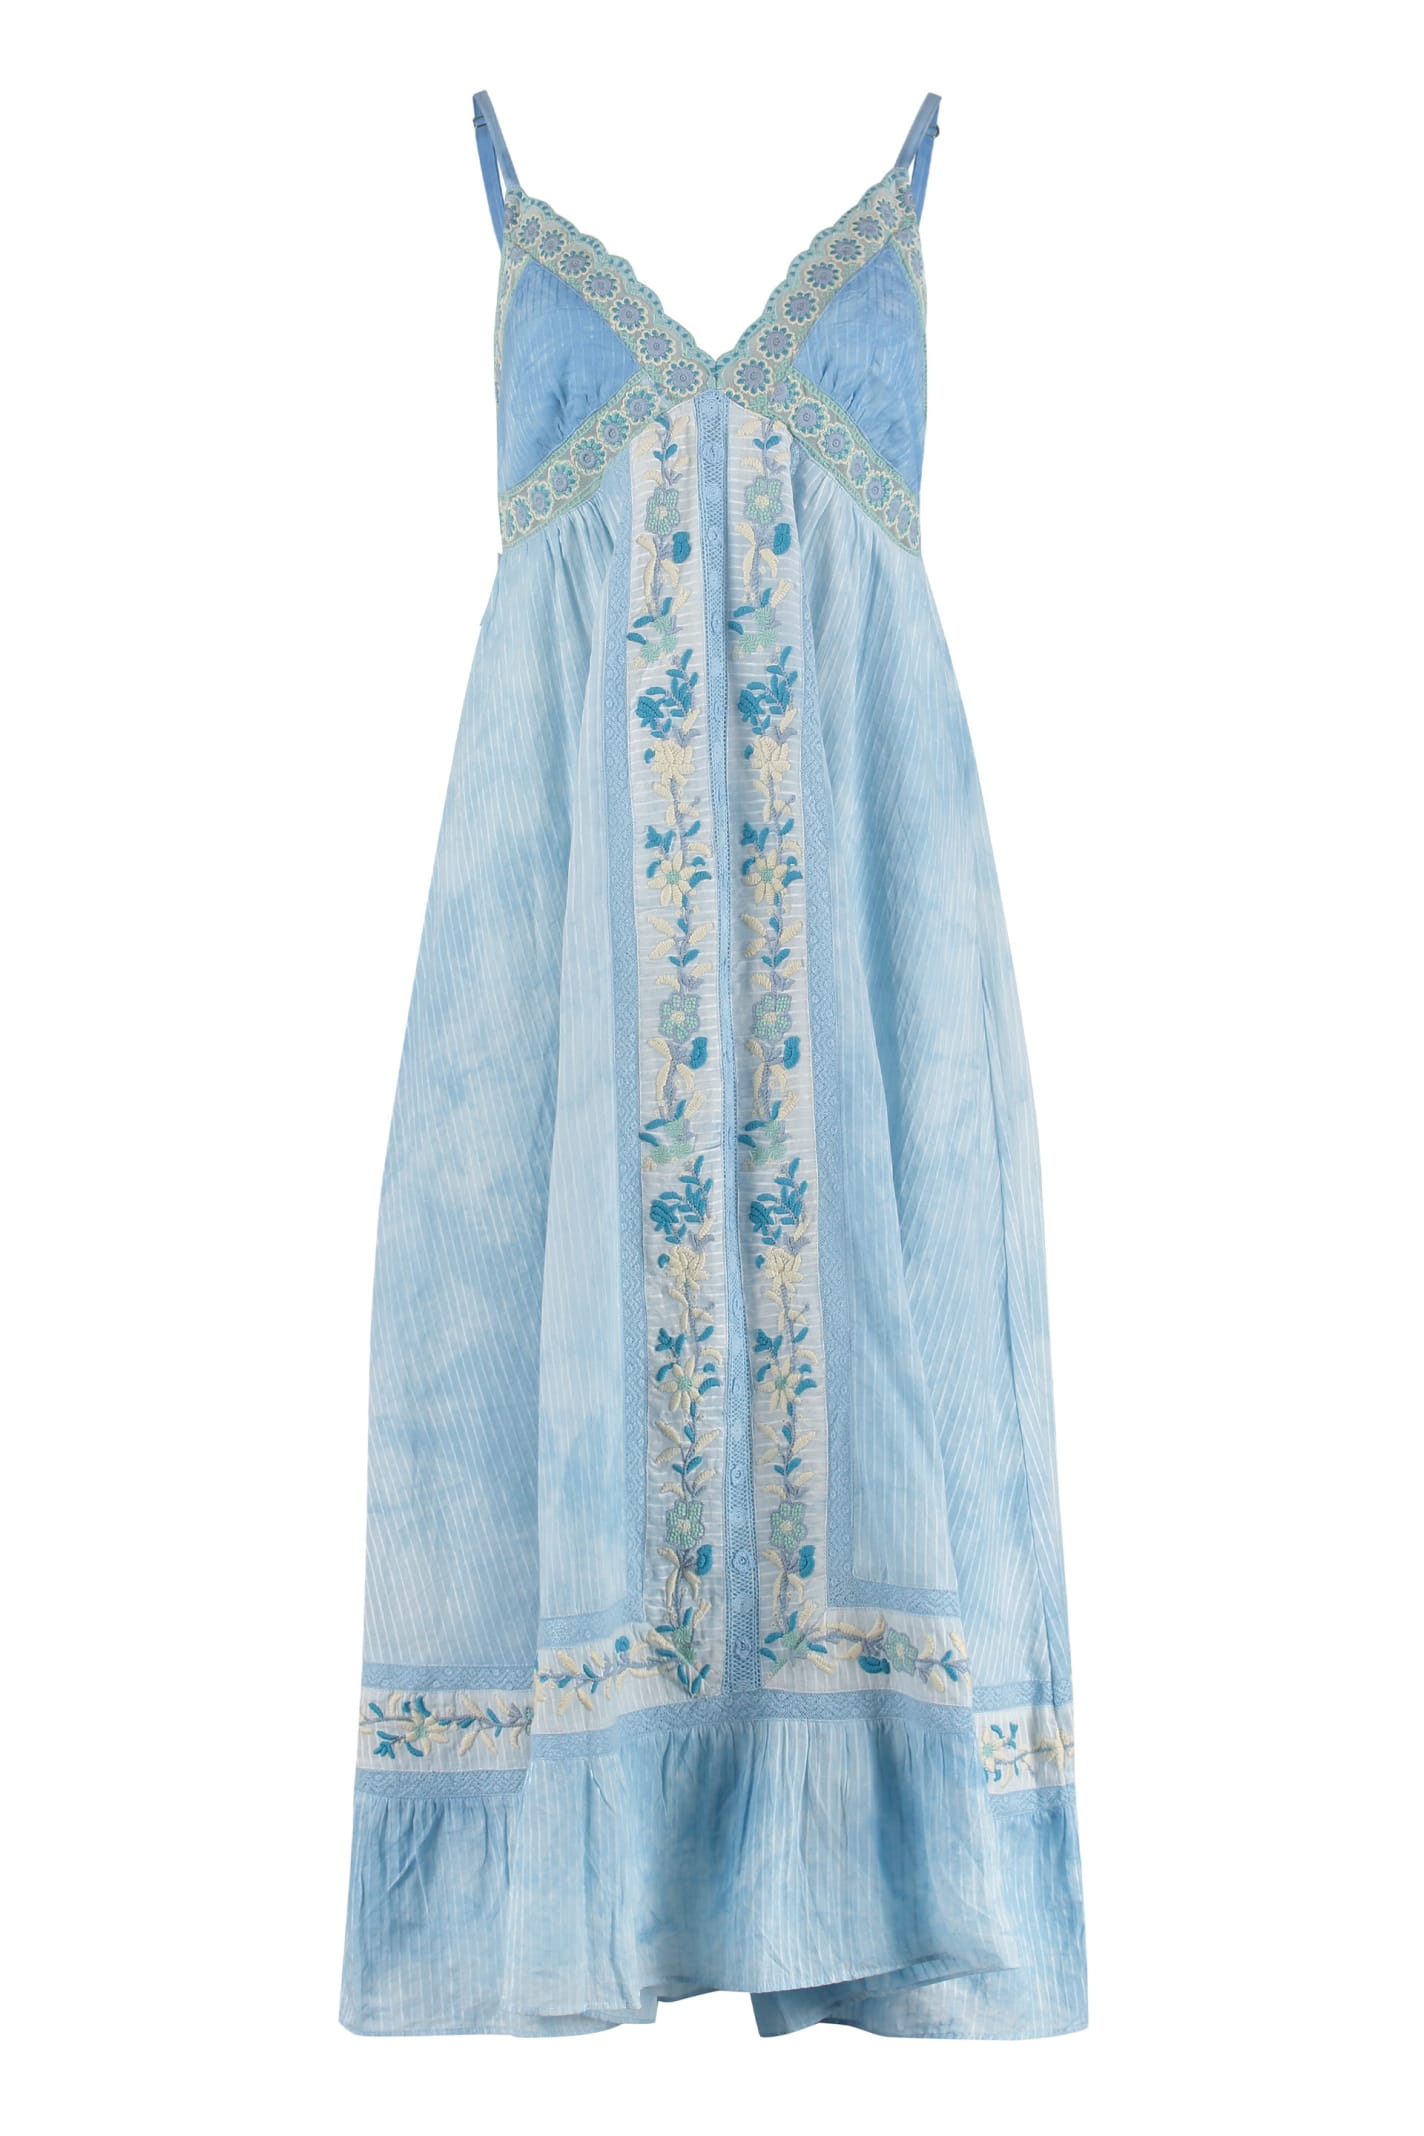 LoveShackFancy King Embroidered Cotton Long Dress